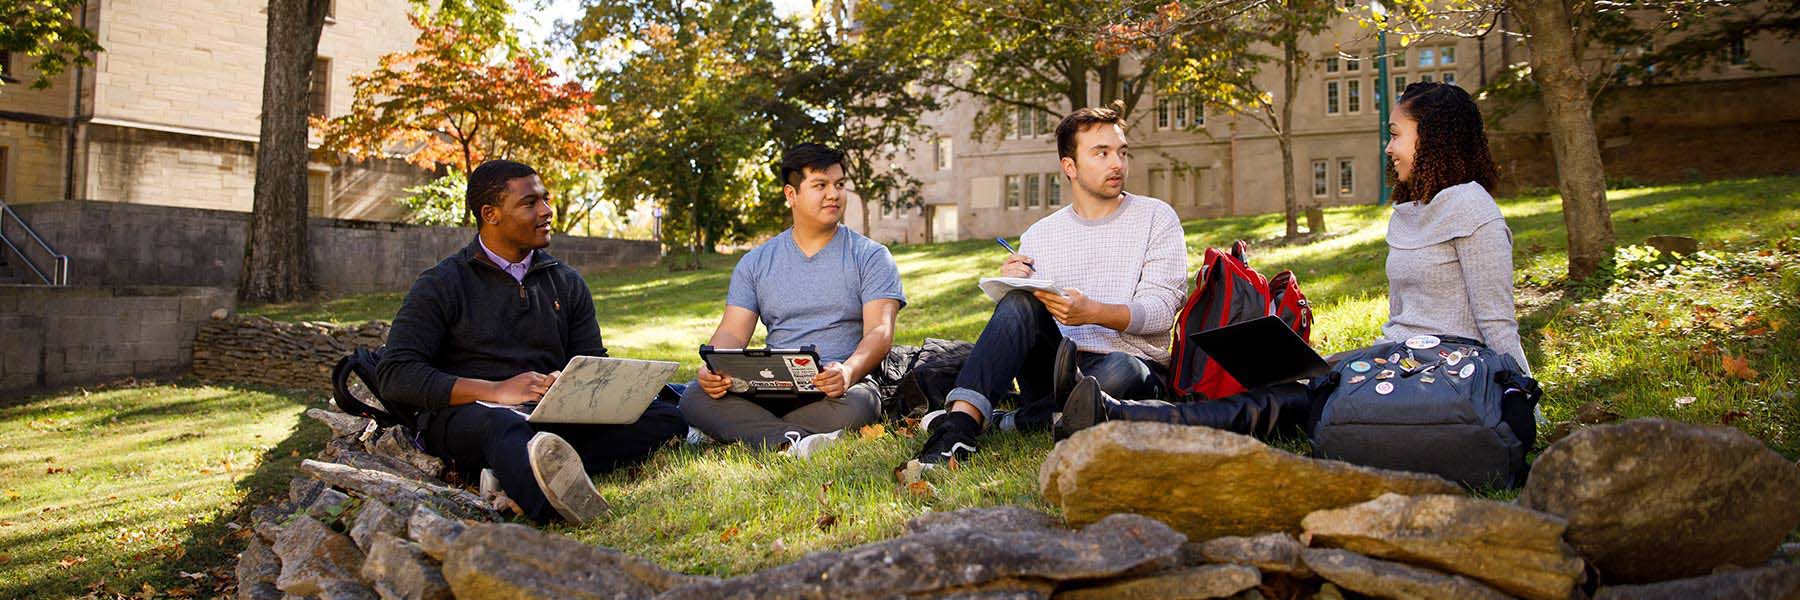 A group of students sits in a greenspace outdoors with their laptops.